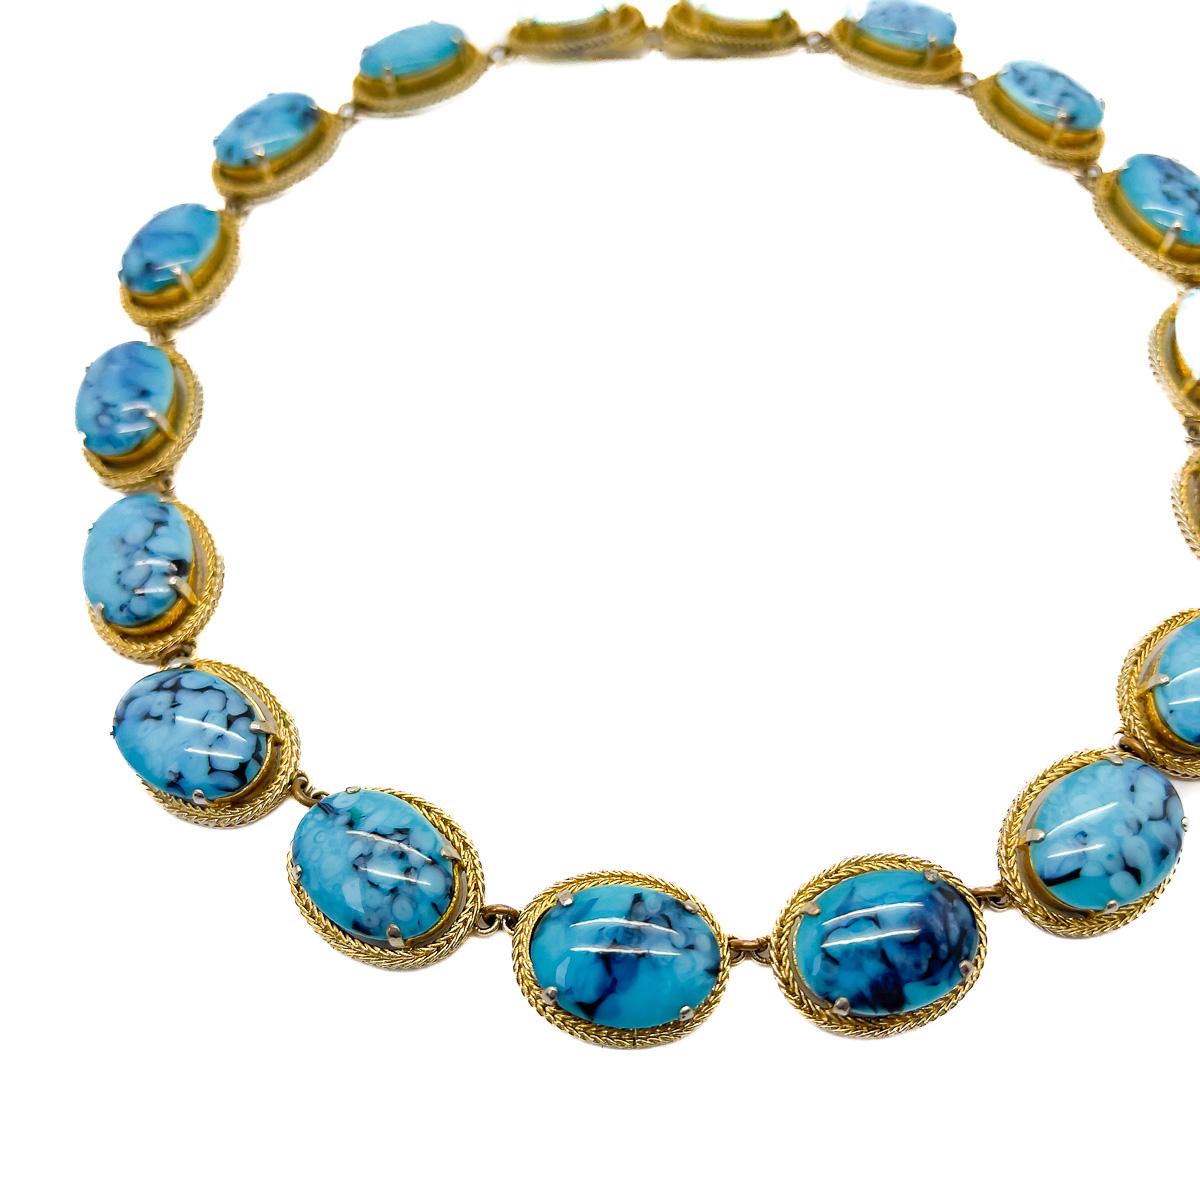 Women's Vintage Dior Turquoise Riviere Necklace 1962 For Sale